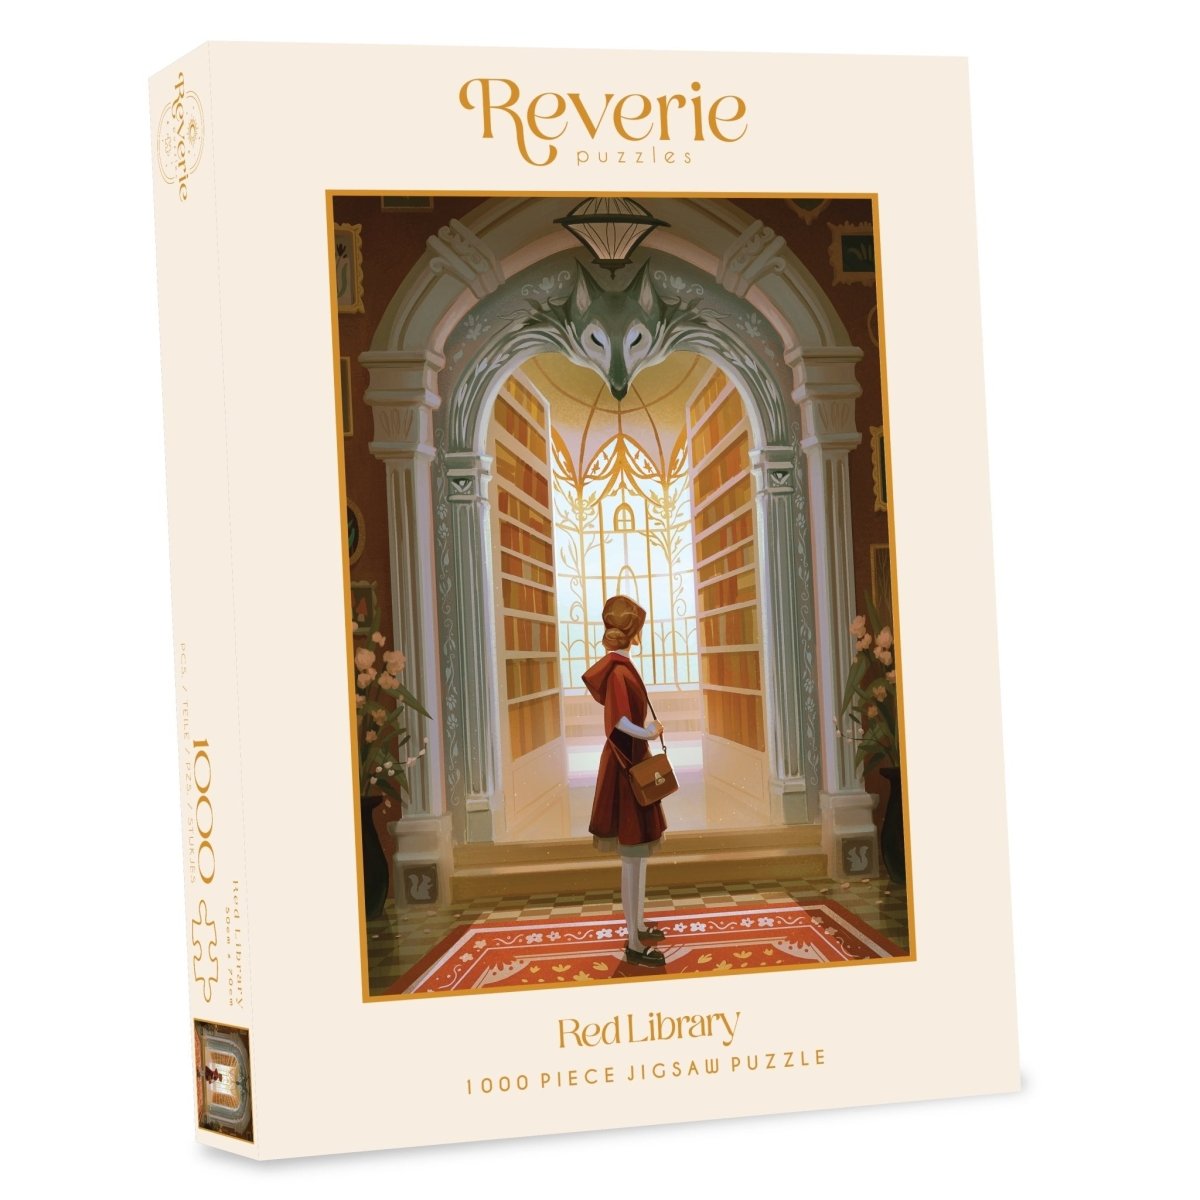 Red Library Jigsaw Puzzle (1000 Pieces) - Reverie Puzzles